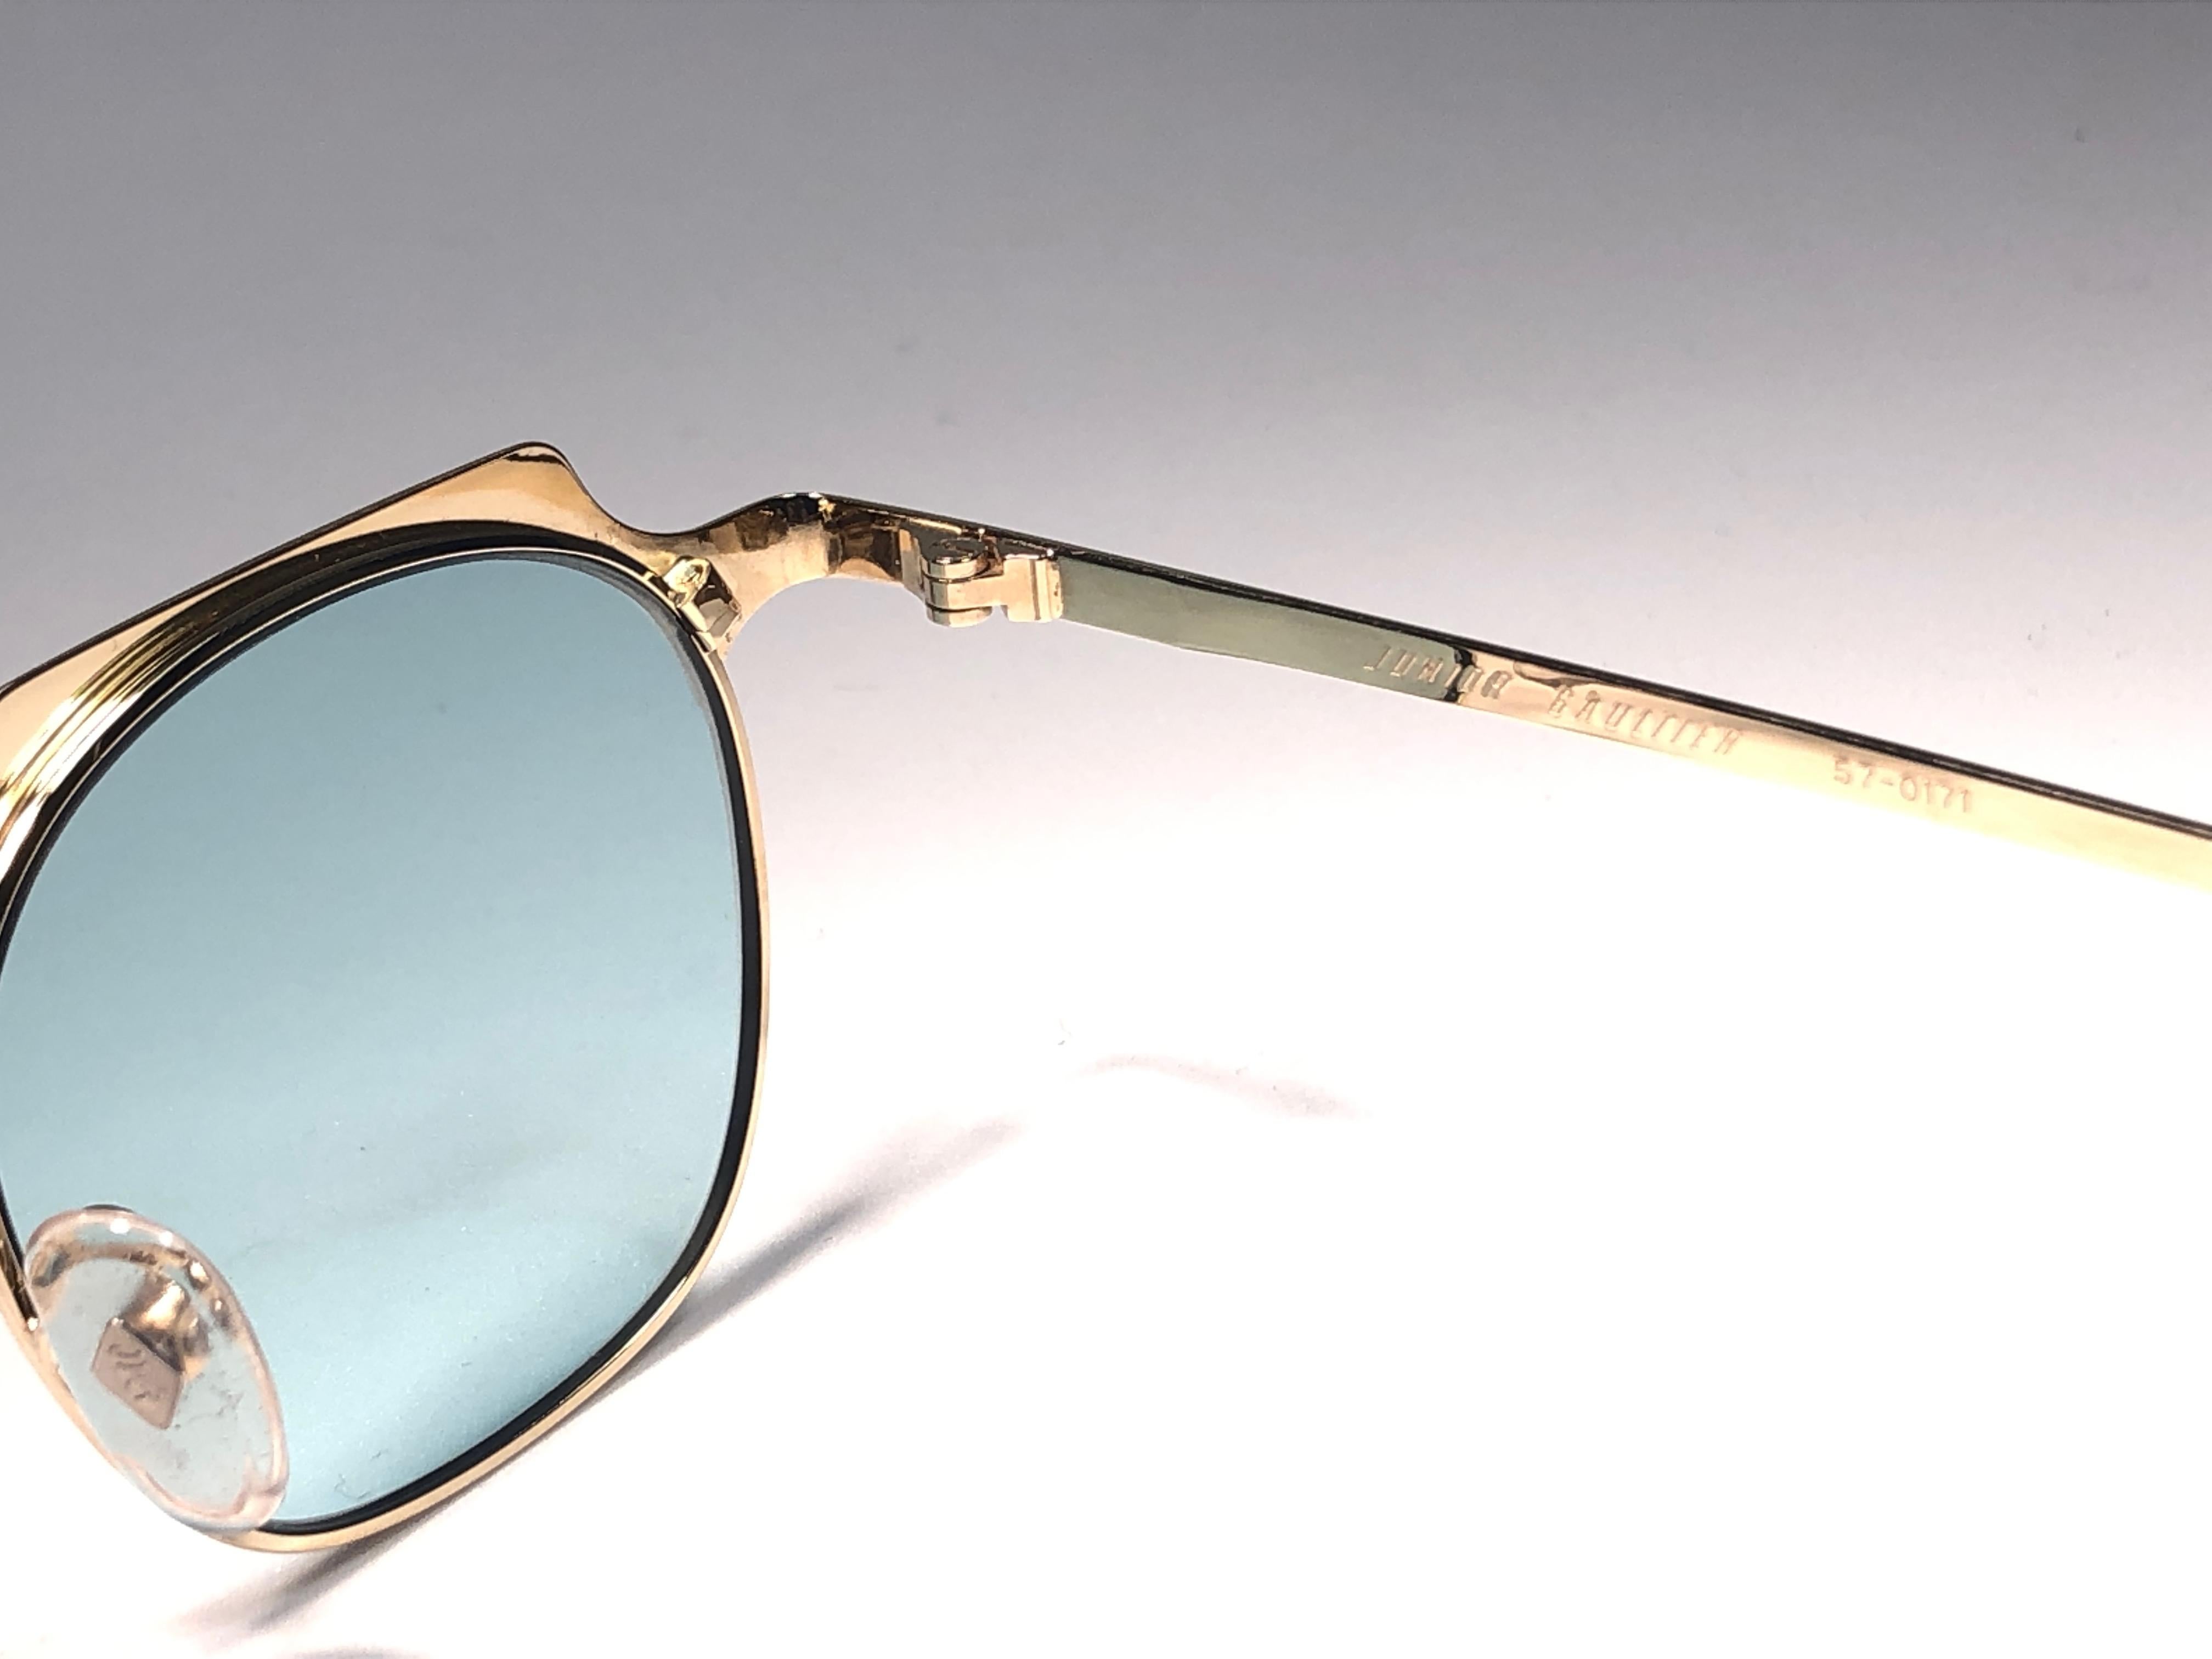 New Jean Paul Gaultier 57 0171 Oval Gold Sunglasses 1990's Made in Japan  1